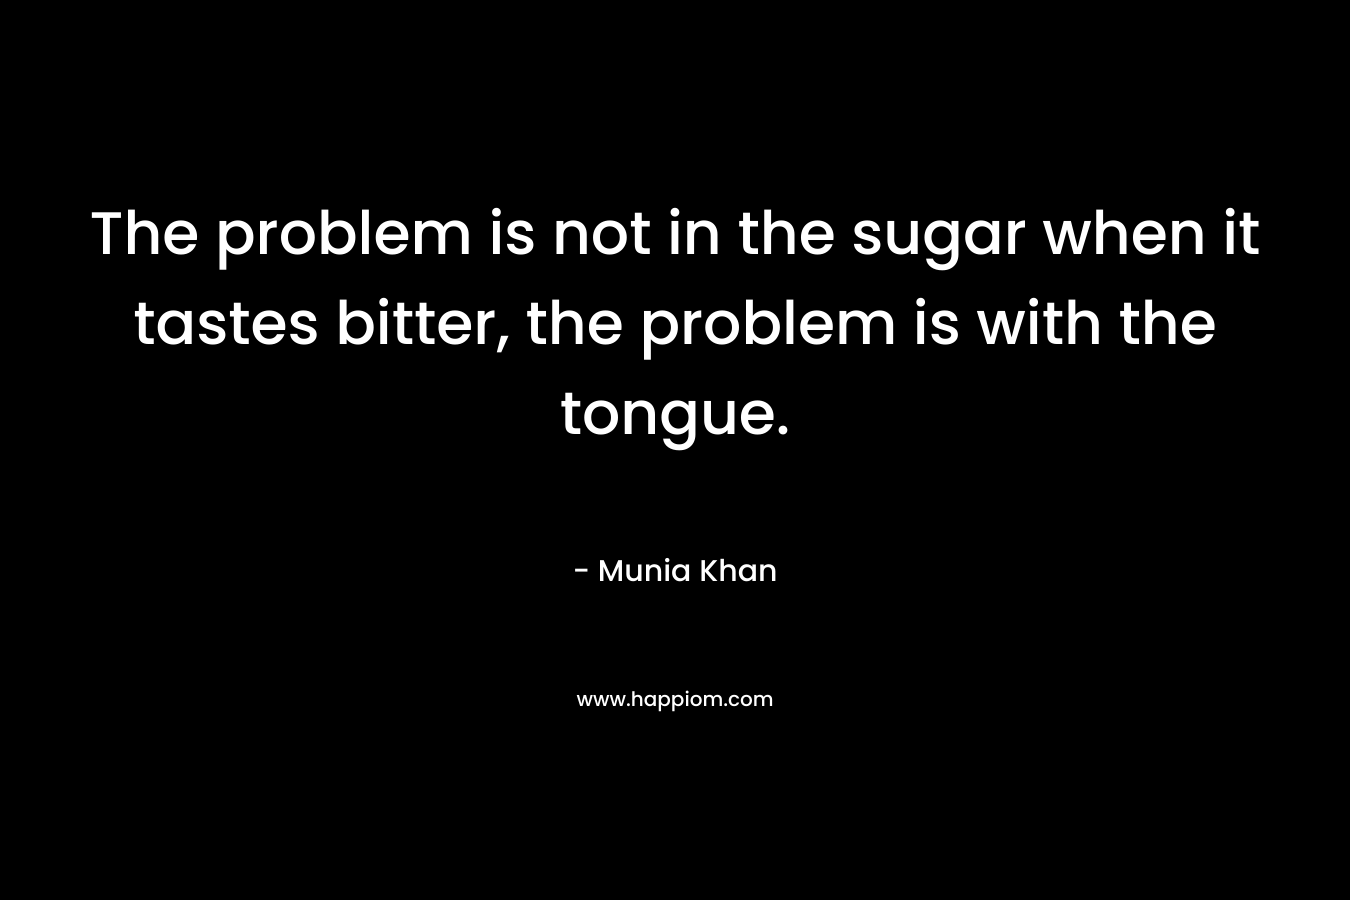 The problem is not in the sugar when it tastes bitter, the problem is with the tongue.